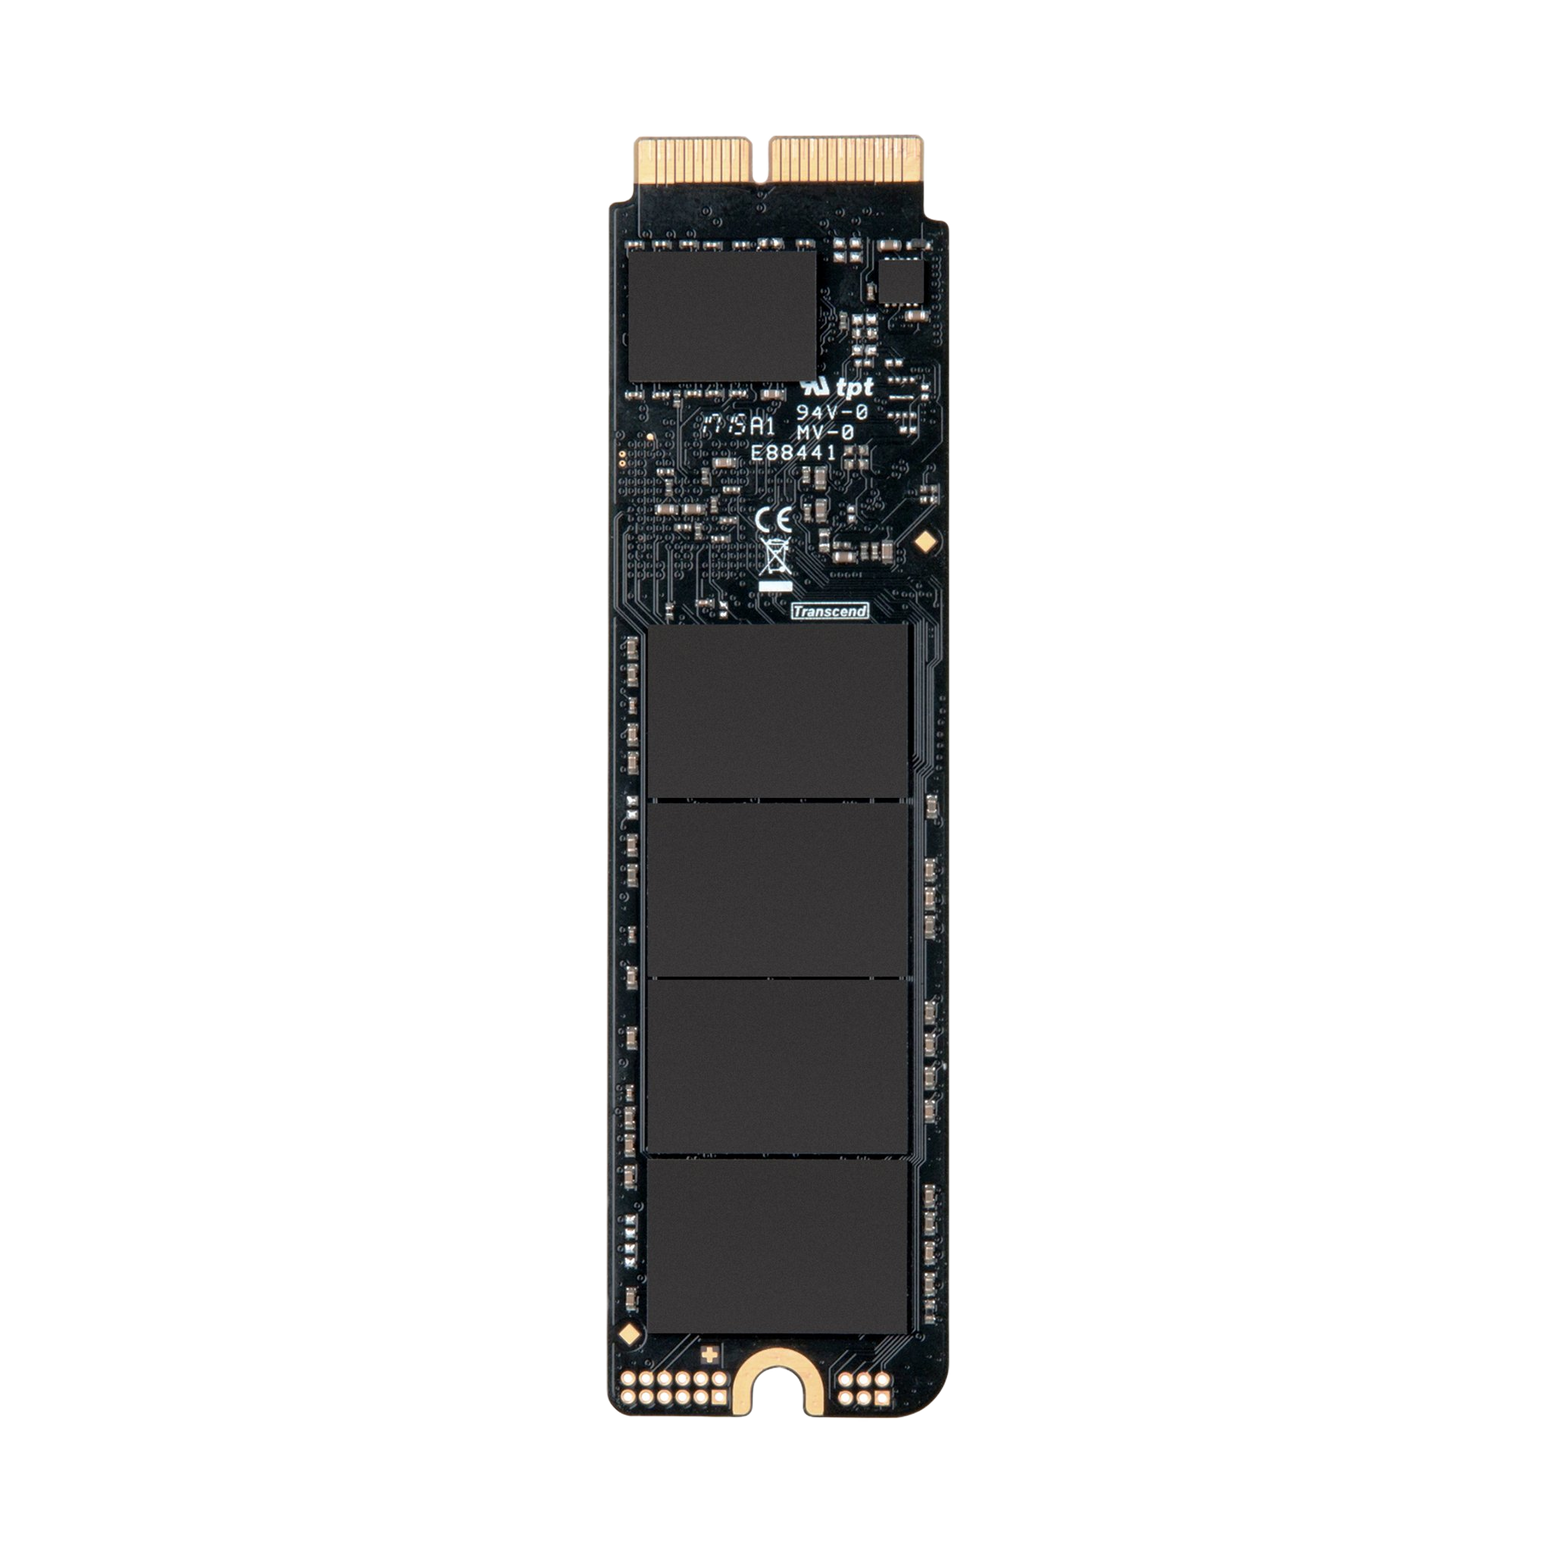 Transcend 480GB Jet Drive 820 SSD Only for MacBook Pro (Late 2013 - Early 2015), MacBook Air (Mid 2013 - Early 2015), Mac mini (Late 2014), Mac Pro (Late 2013) - AHCI Gen3 x2